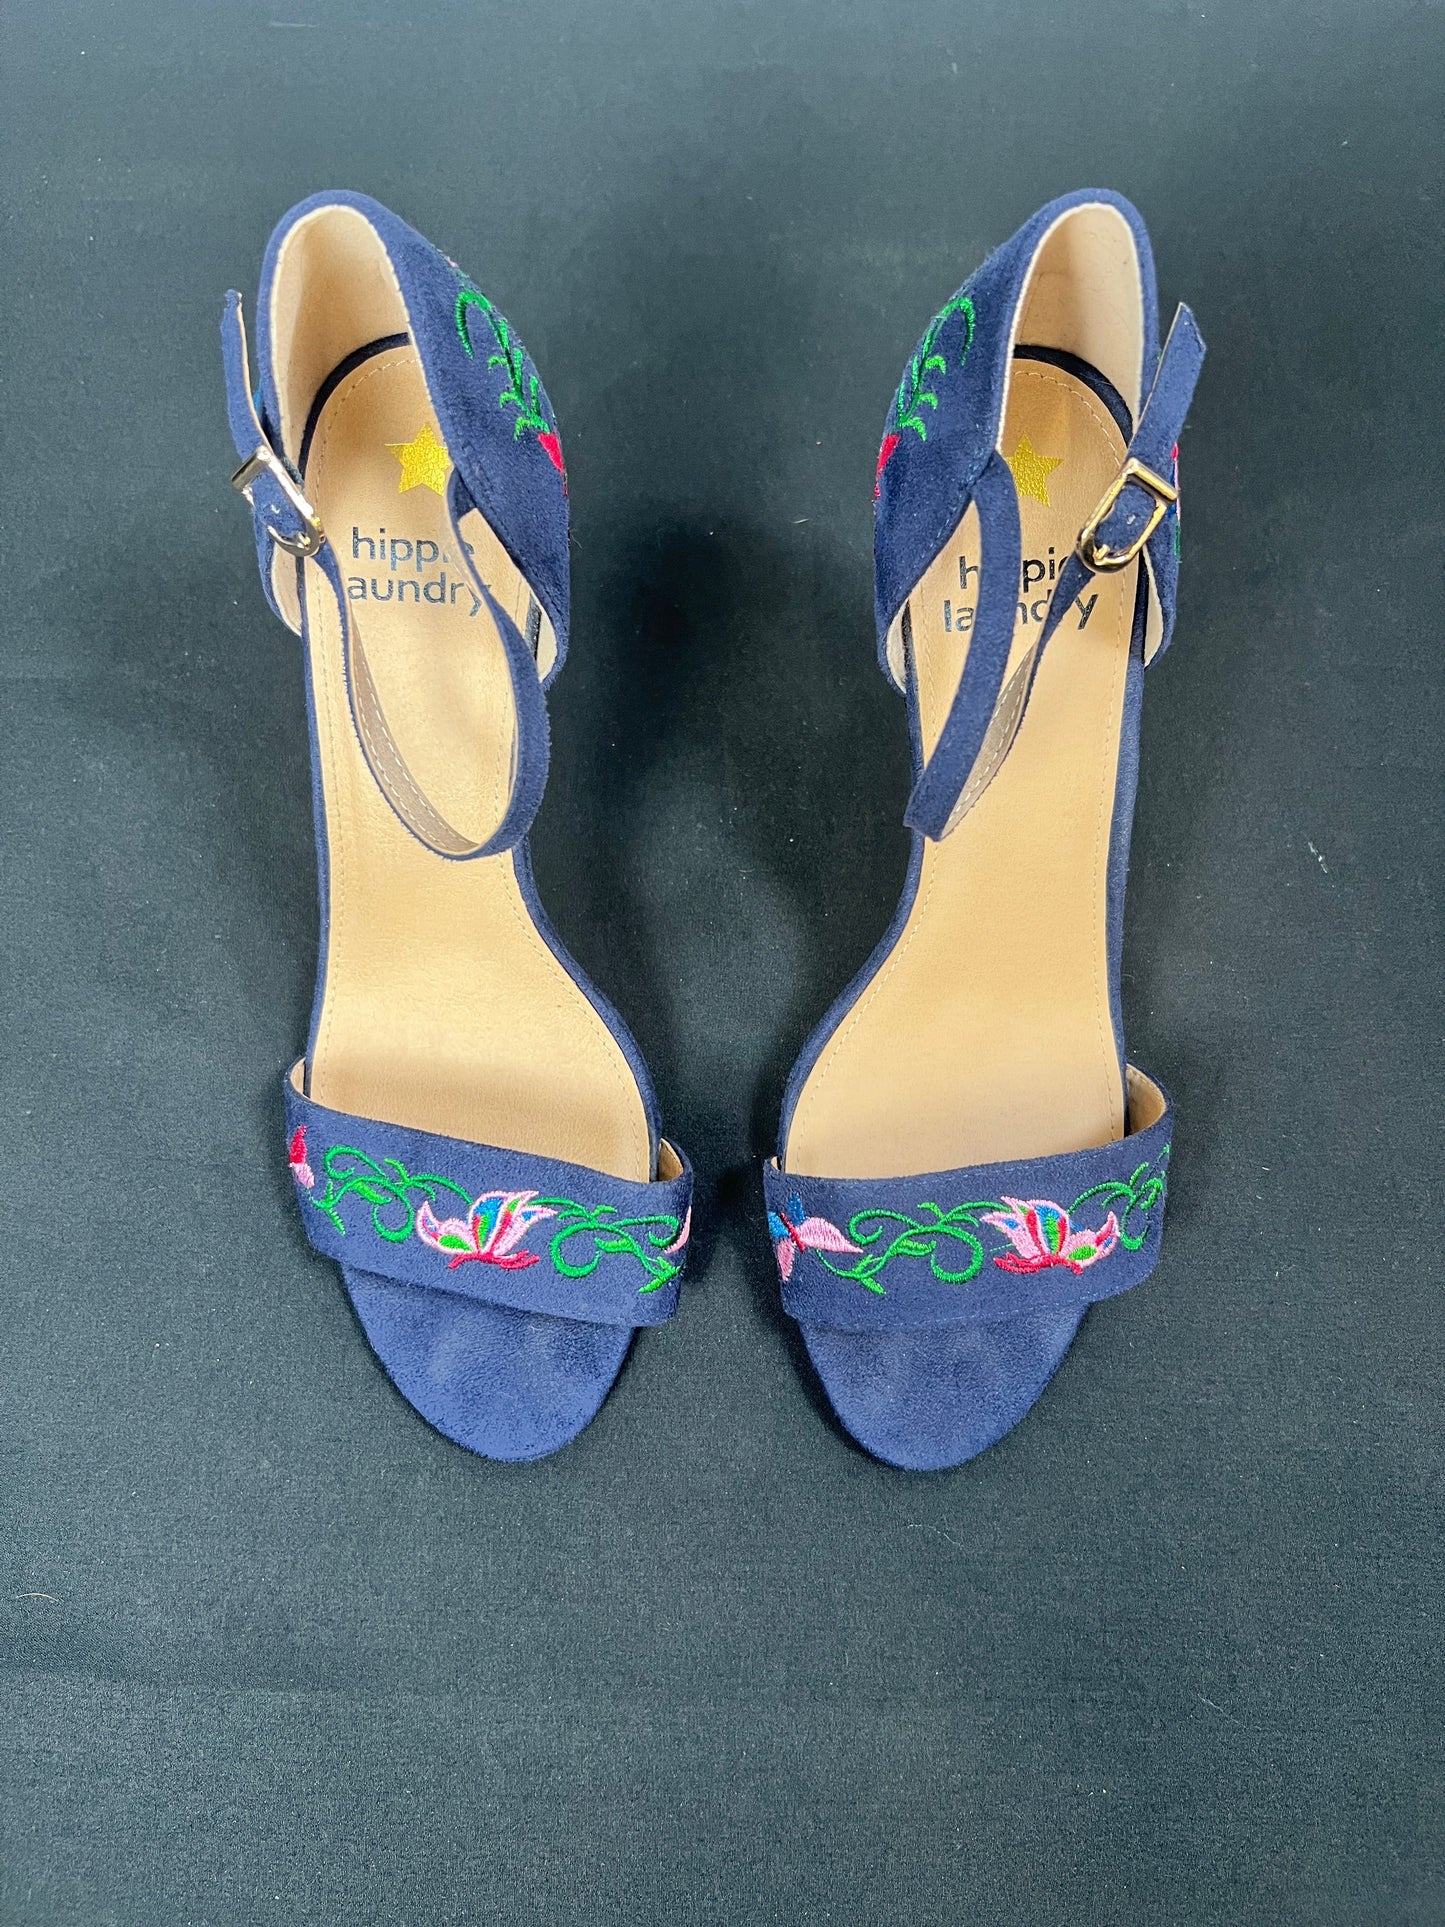 Shoes Heels Stiletto By Hippie Laundry  Size: 10